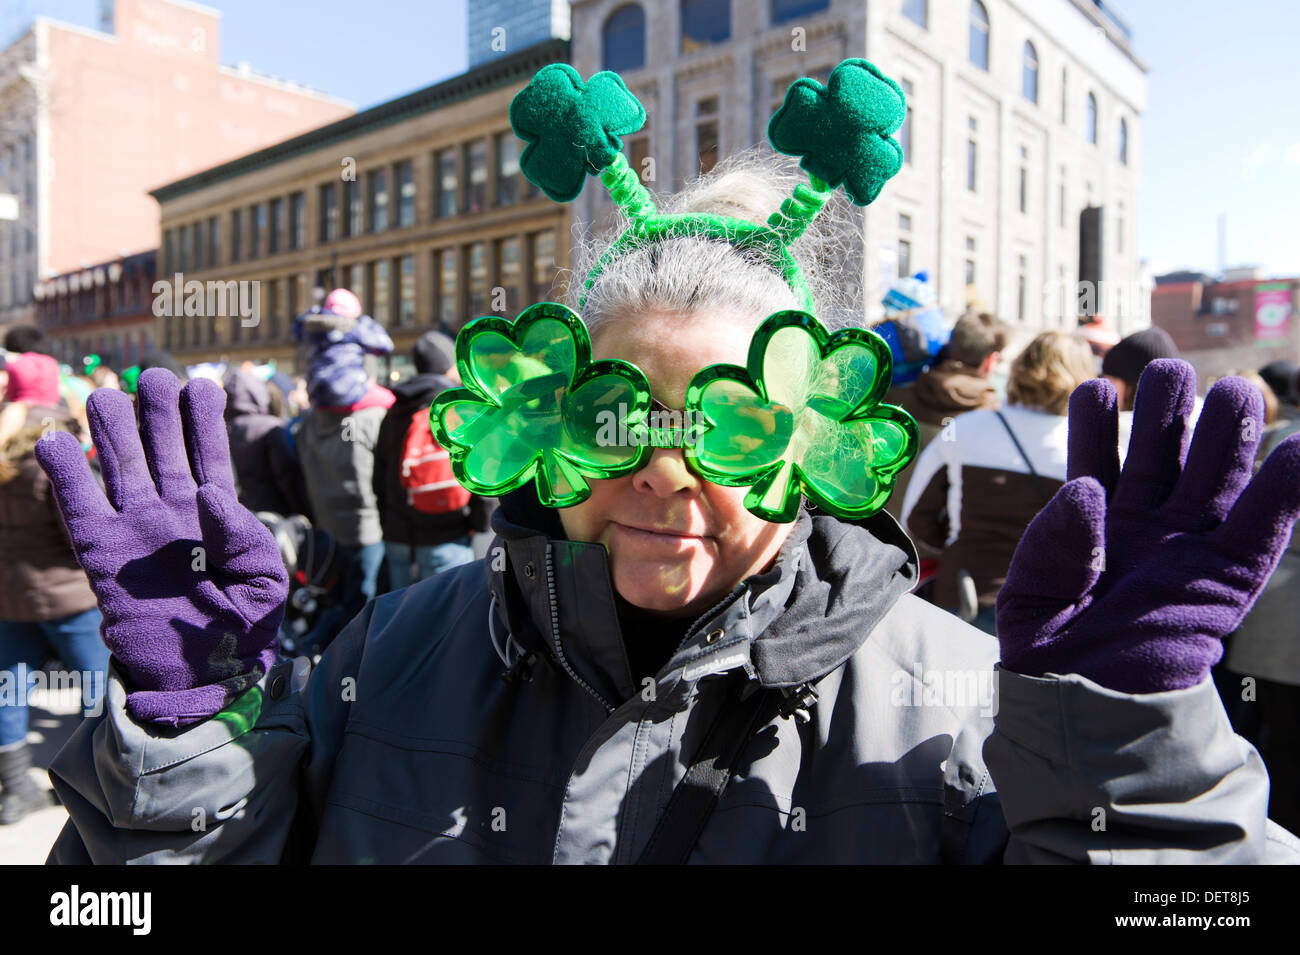 Woman wearing Irish shamrock sunglasses and antennas at the St-Patricks day parade in Montreal, province of Quebec, Canada. Stock Photo